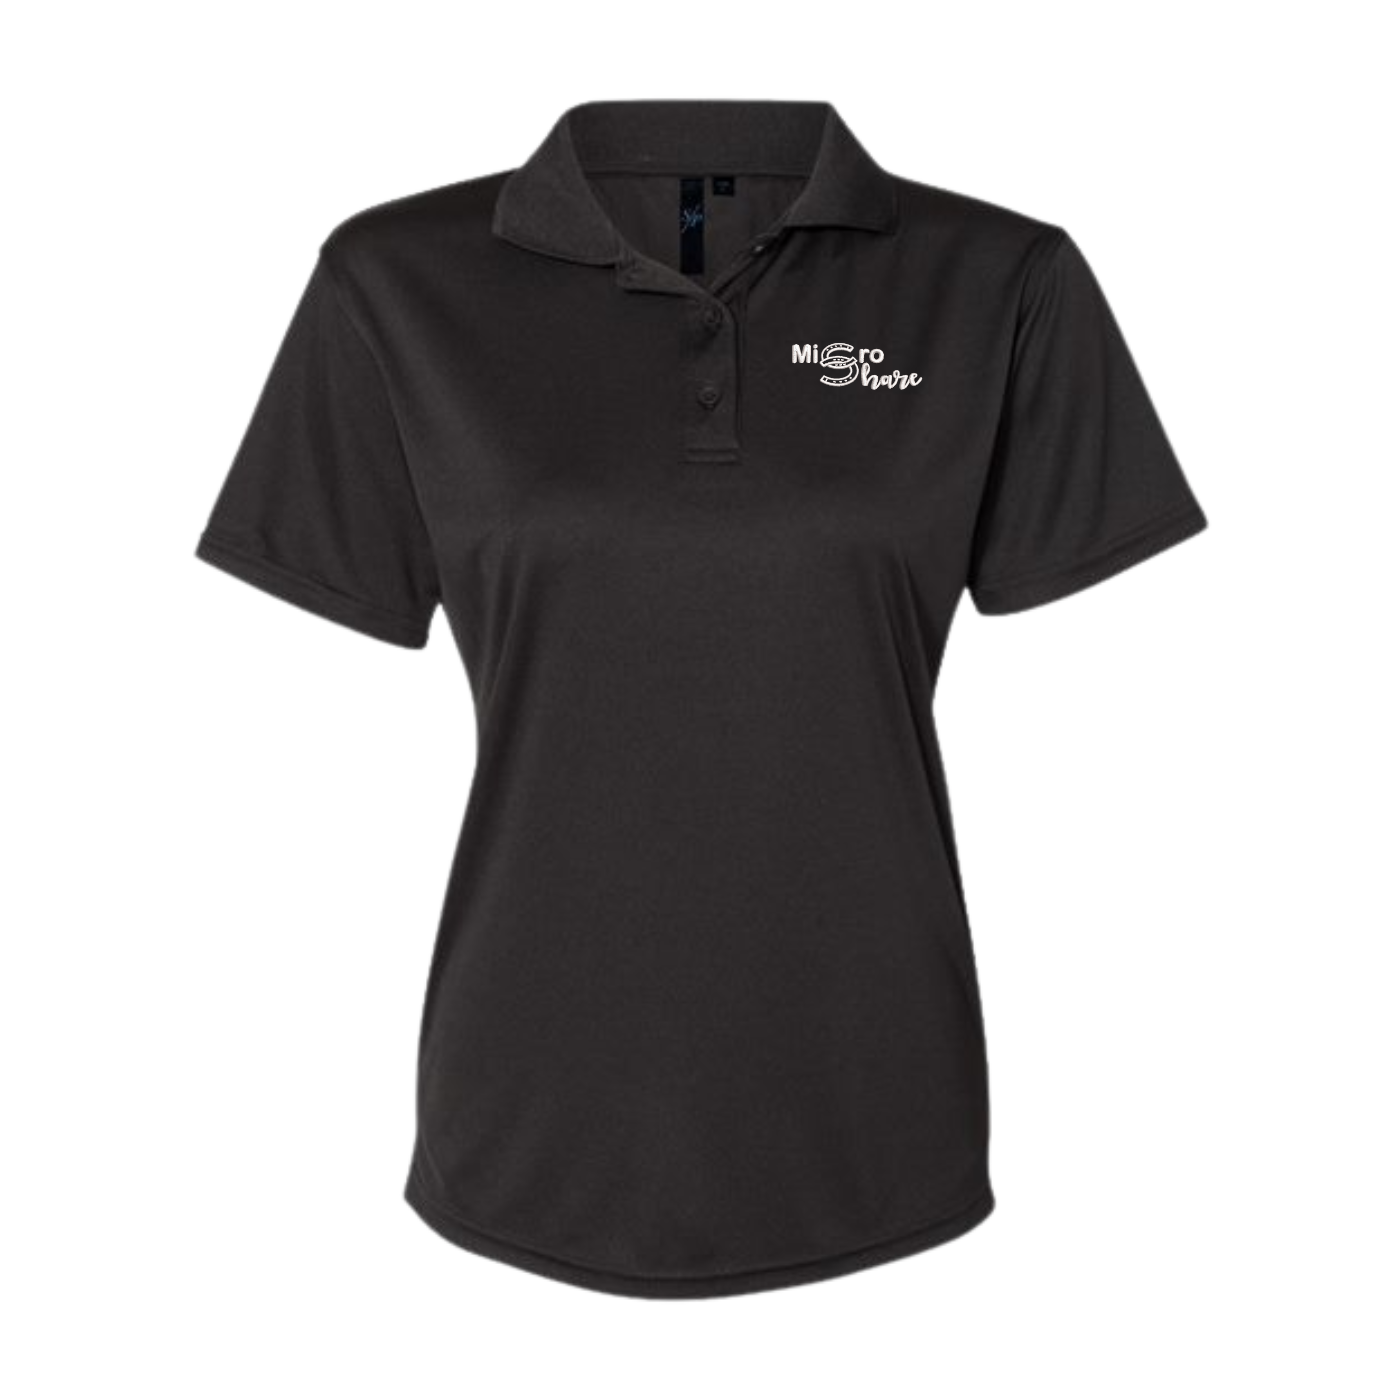 Micro Share Women's Embroidered Polo Shirt